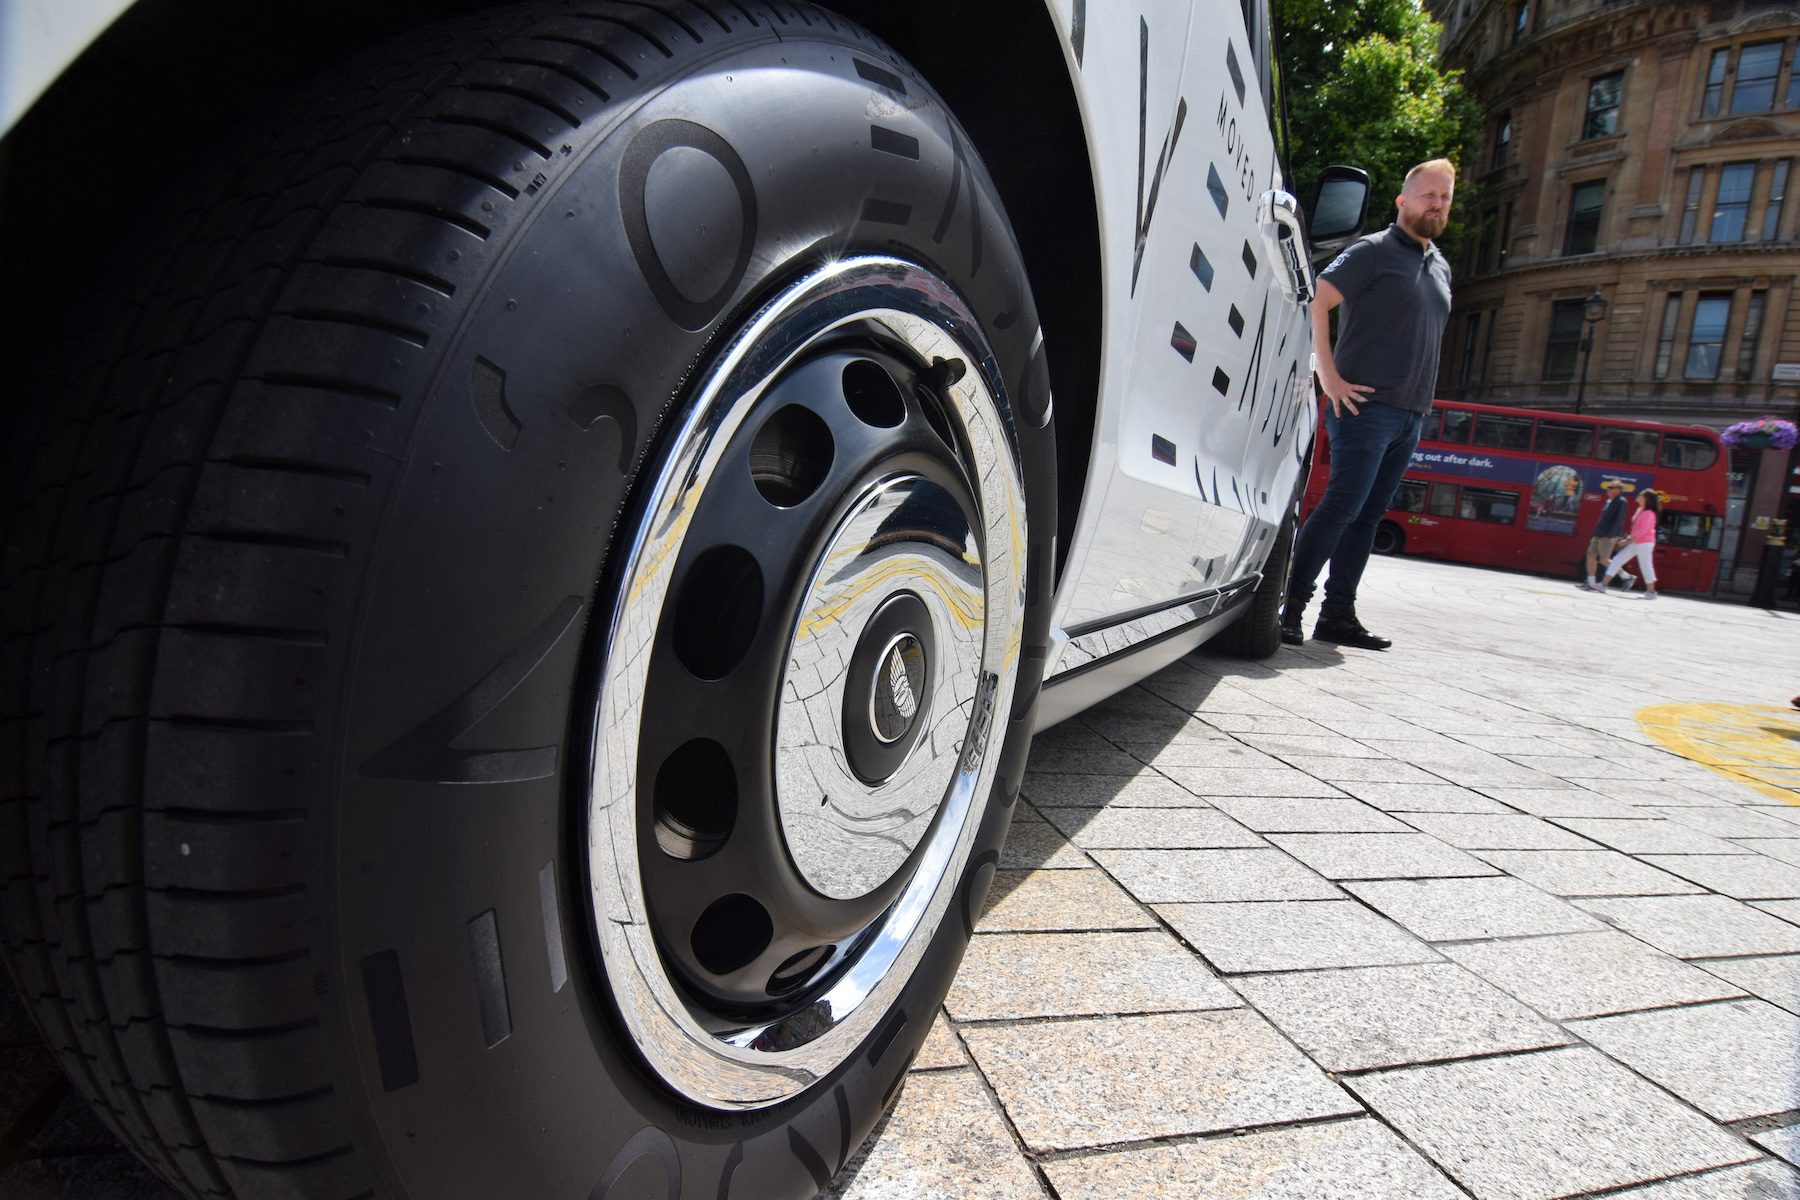 Tire-makers under pressure as too much rubber hits the road